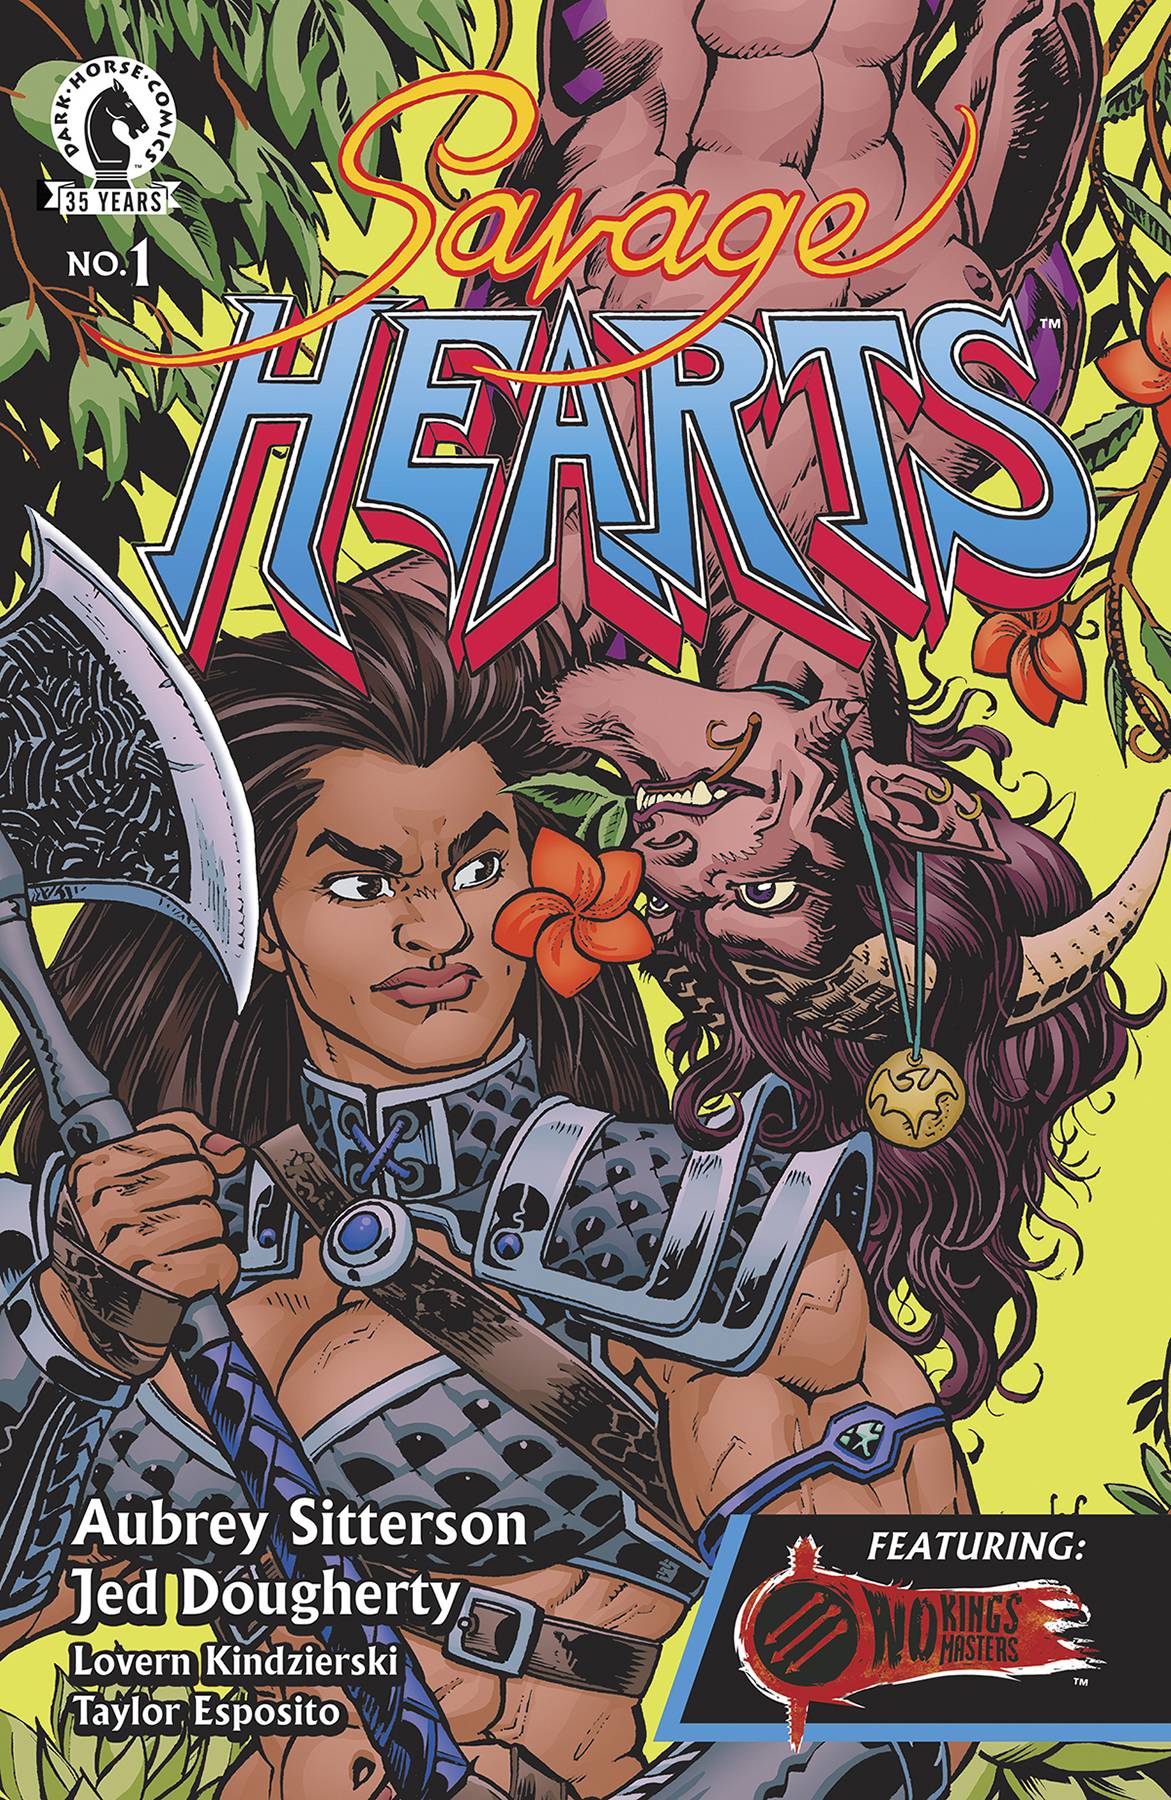 Savage Hearts #1 (Of 5) (Mr) (07/14/2021) - State of Comics